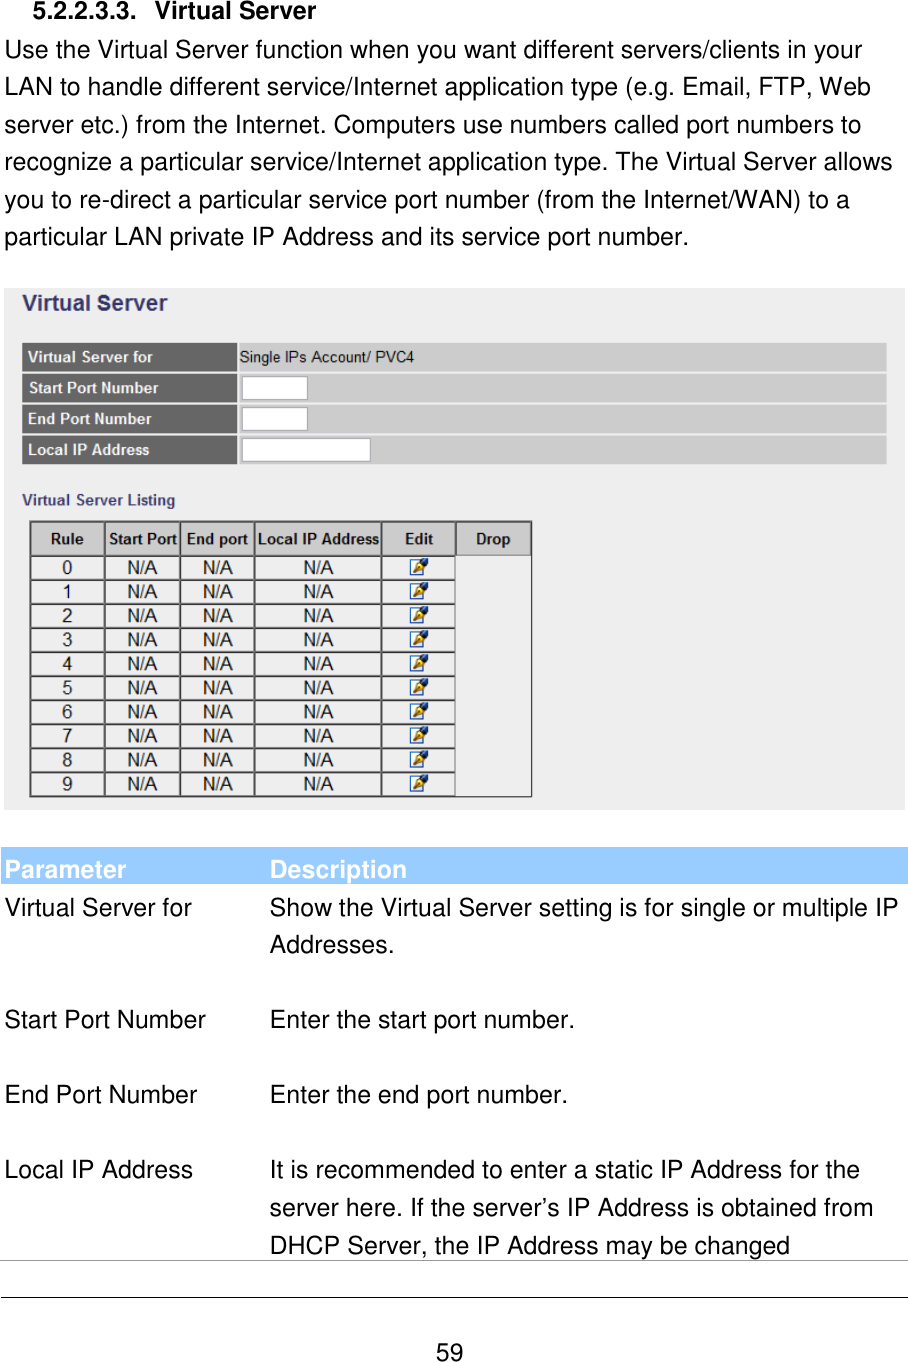   59  5.2.2.3.3.  Virtual Server Use the Virtual Server function when you want different servers/clients in your LAN to handle different service/Internet application type (e.g. Email, FTP, Web server etc.) from the Internet. Computers use numbers called port numbers to recognize a particular service/Internet application type. The Virtual Server allows you to re-direct a particular service port number (from the Internet/WAN) to a particular LAN private IP Address and its service port number.    Parameter Description Virtual Server for Show the Virtual Server setting is for single or multiple IP Addresses.   Start Port Number Enter the start port number.   End Port Number Enter the end port number.   Local IP Address It is recommended to enter a static IP Address for the server here. If the server’s IP Address is obtained from DHCP Server, the IP Address may be changed 